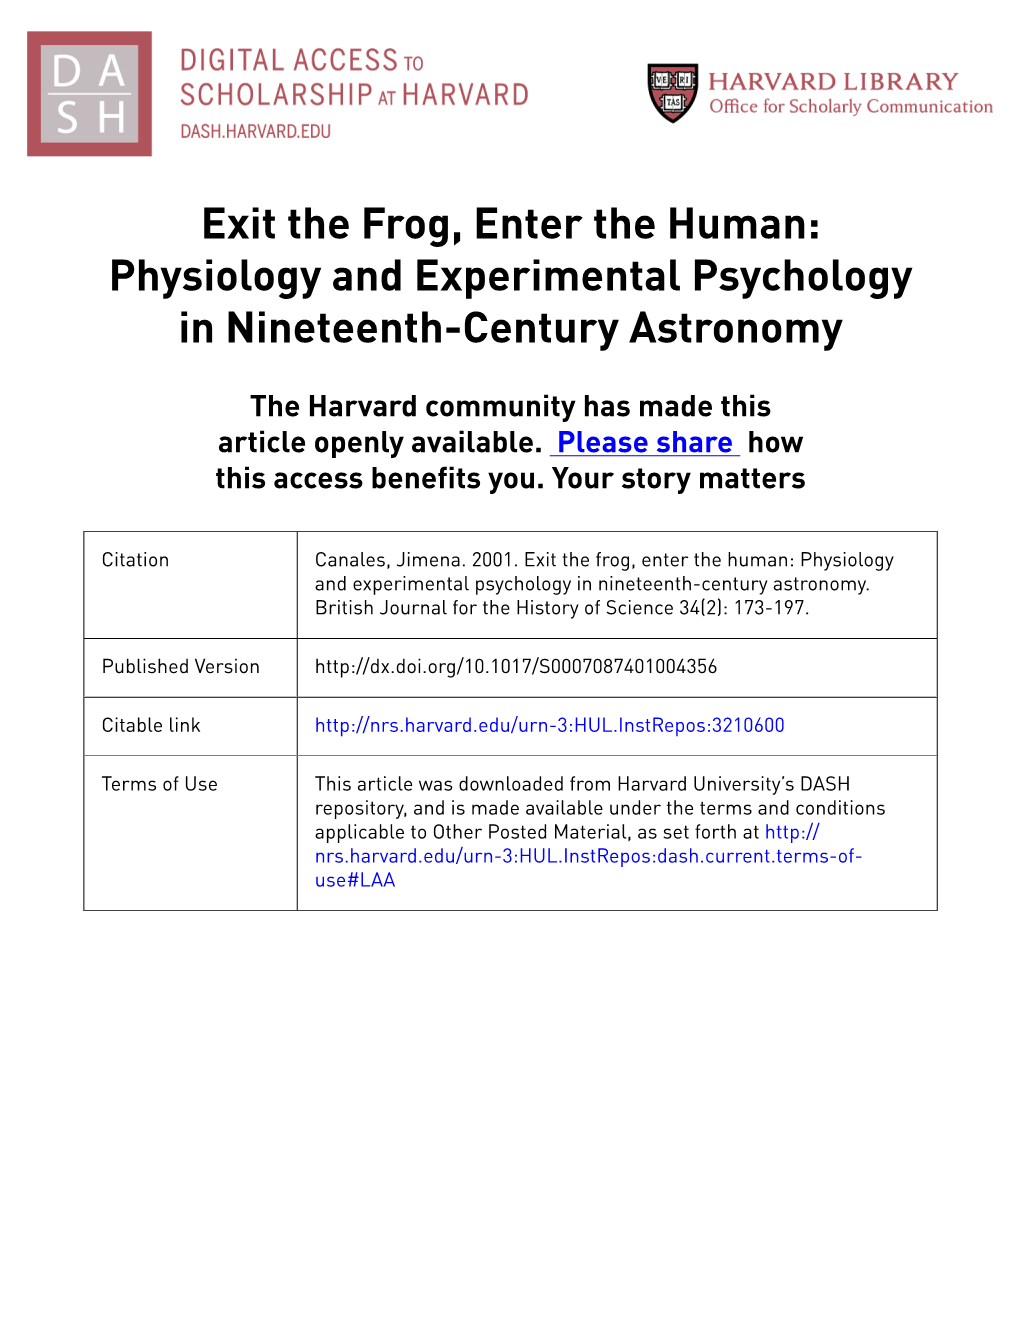 Exit the Frog, Enter the Human: Physiology and Experimental Psychology in Nineteenth-Century Astronomy